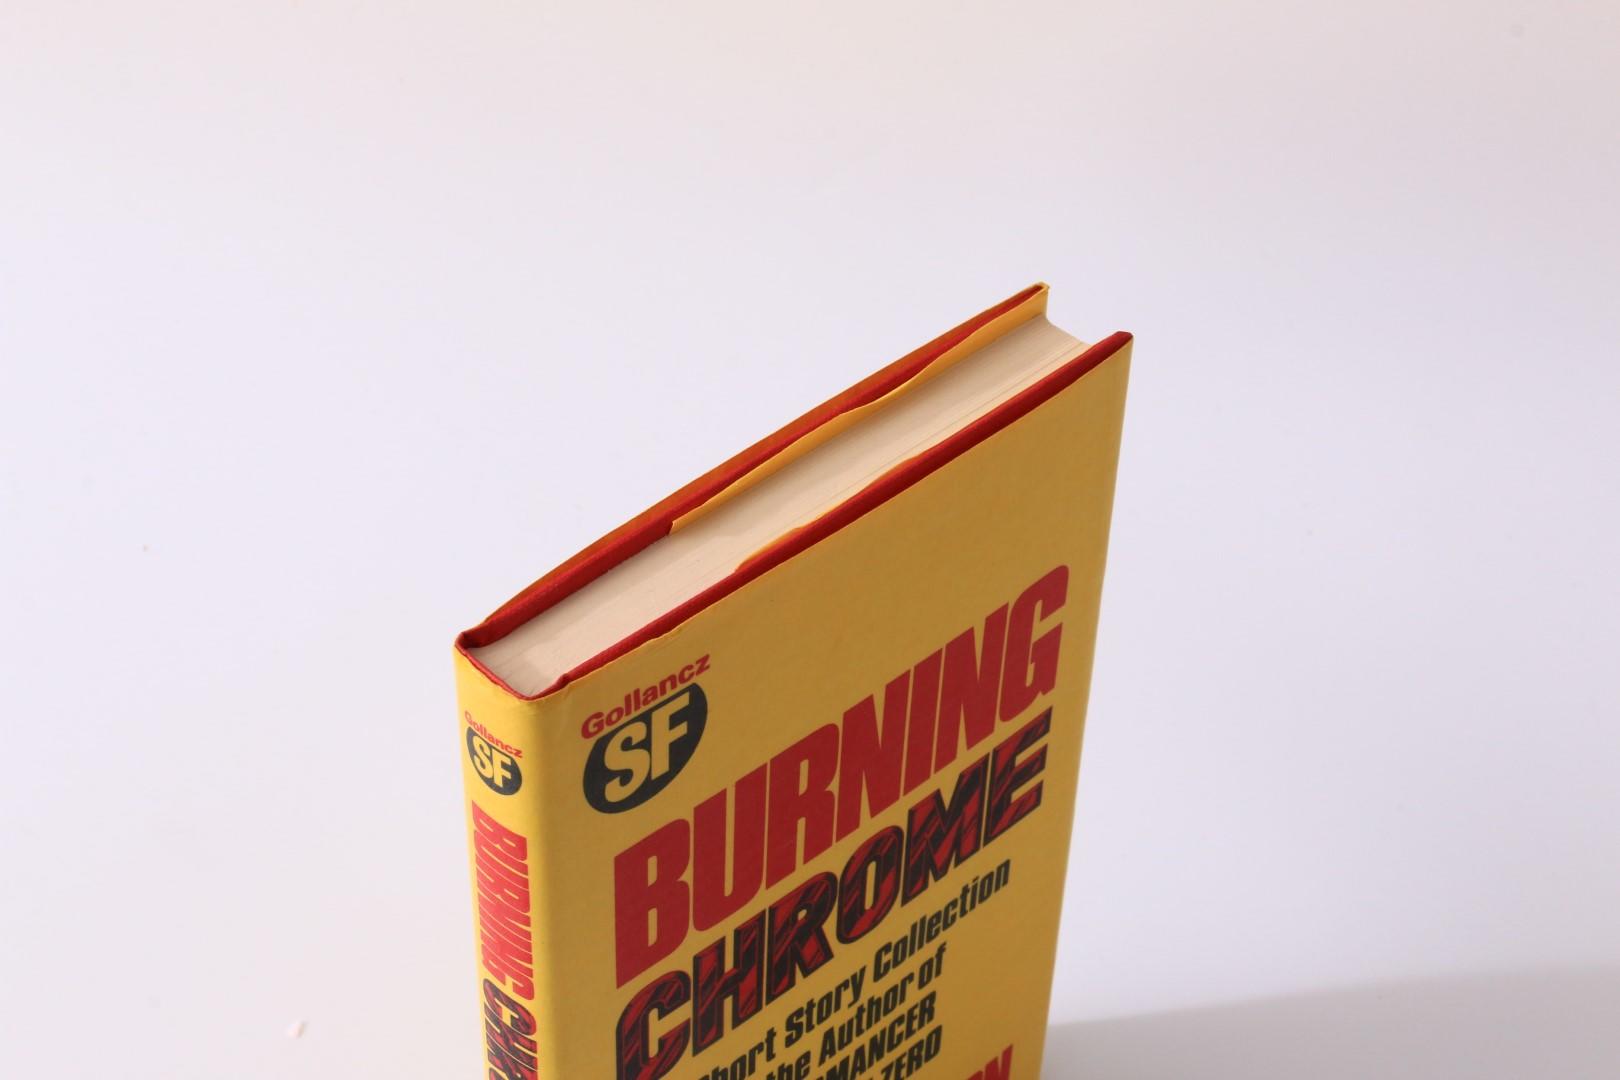 William Gibson - Burning Chrome - Gollancz, 1986, Signed First Edition.